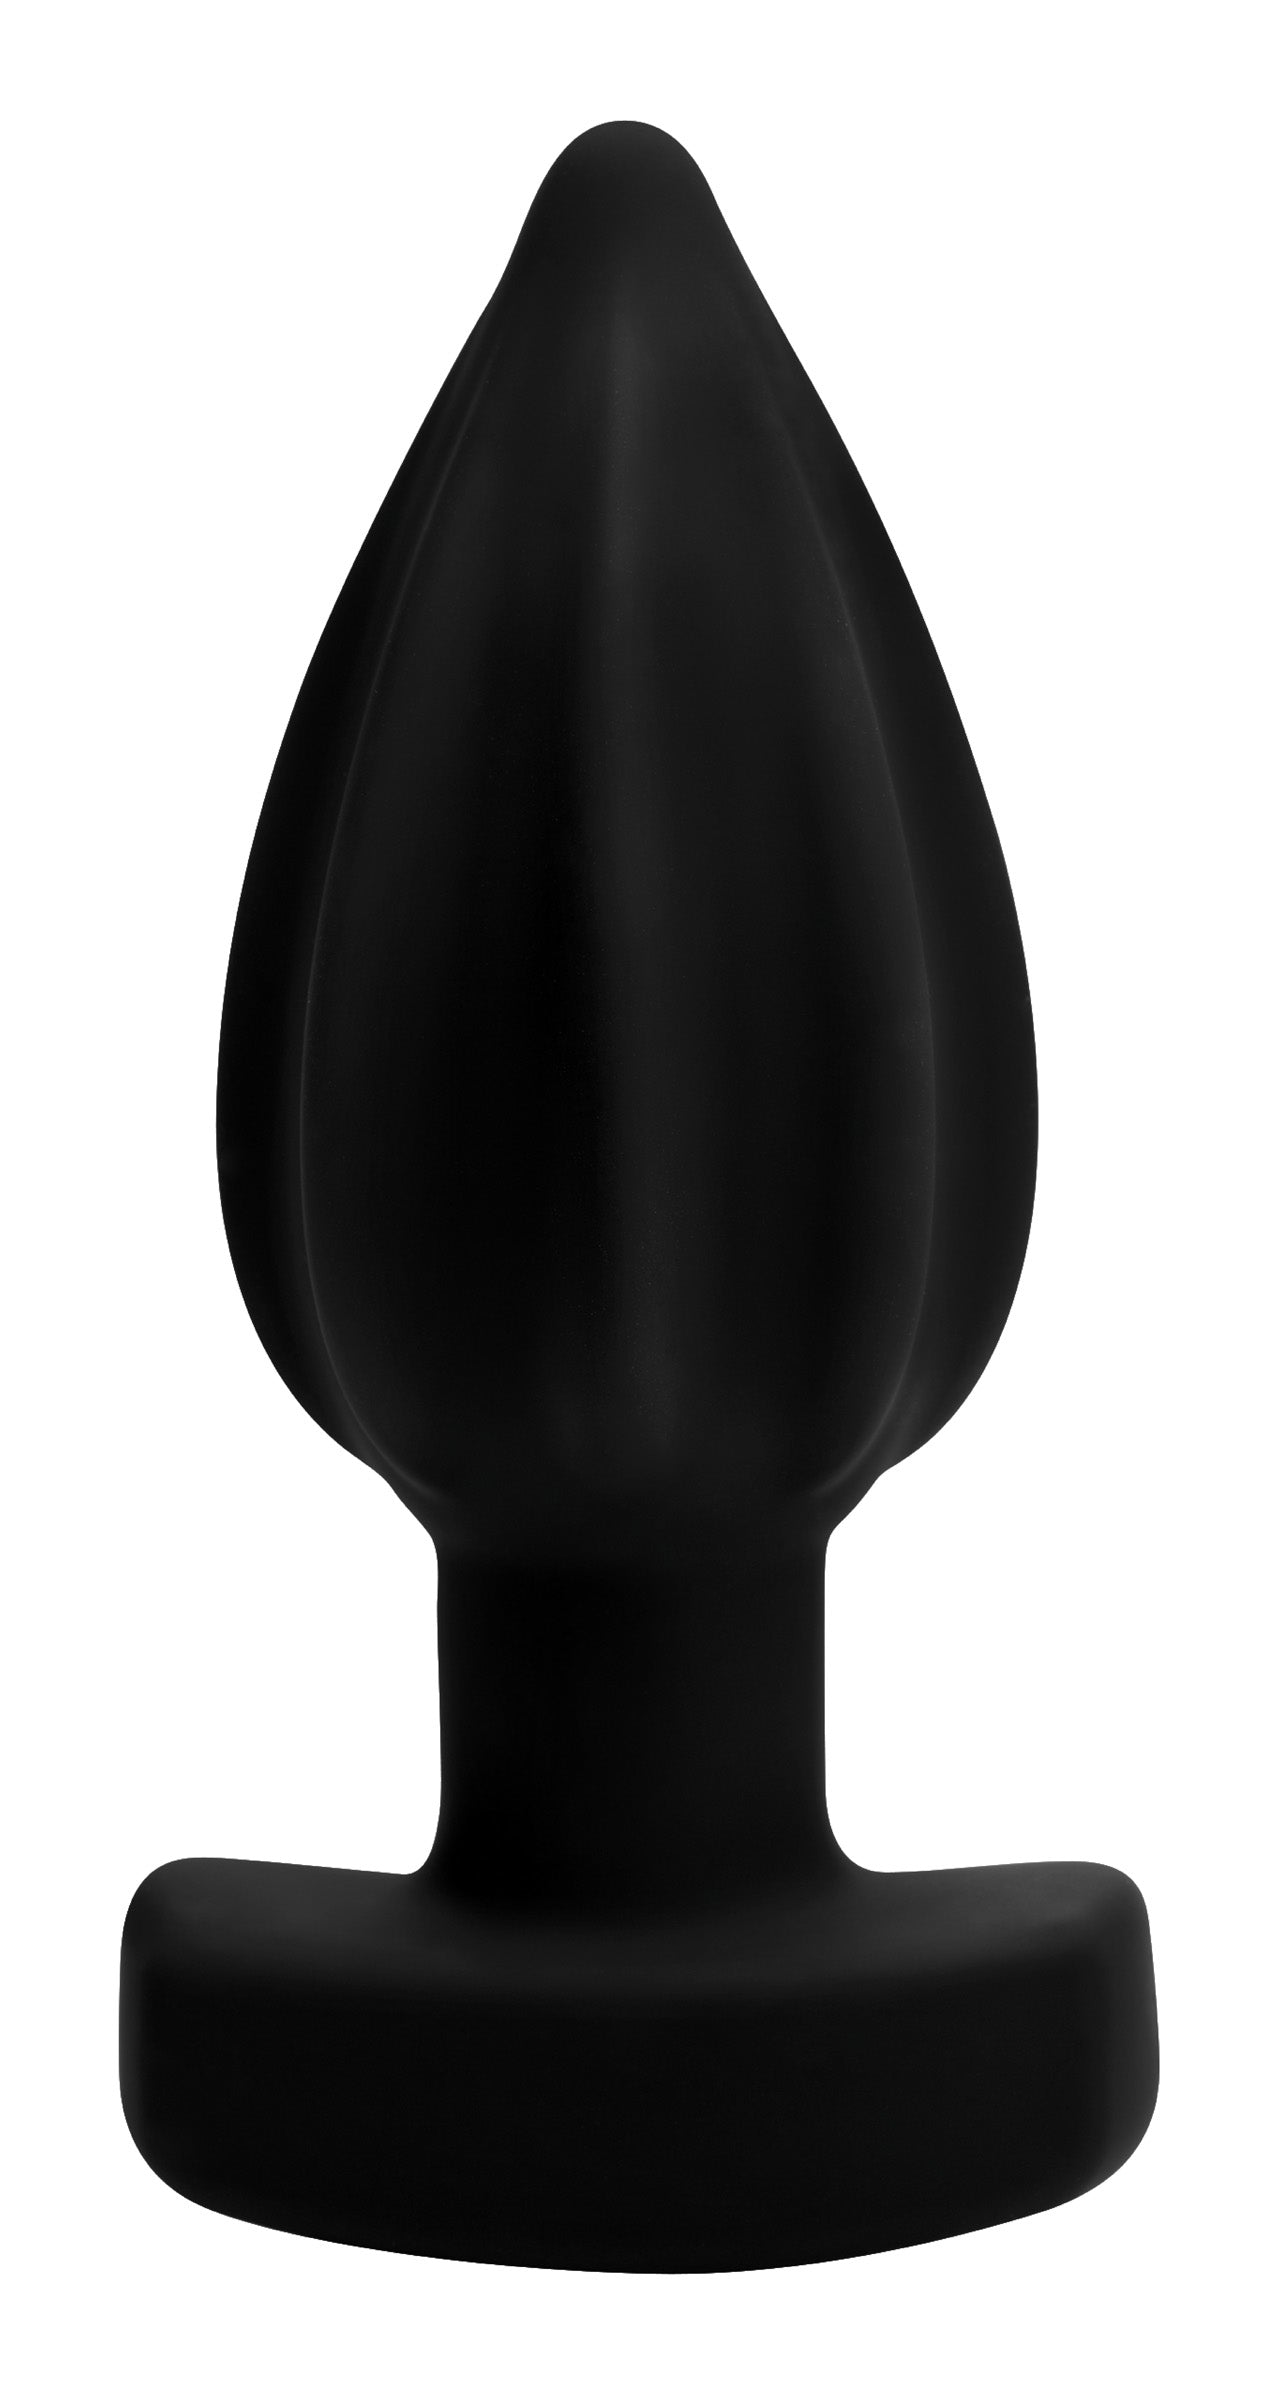 The Assterisk 10X Ribbed Silicone Remote Control Vibrating Butt Plug - UABDSM